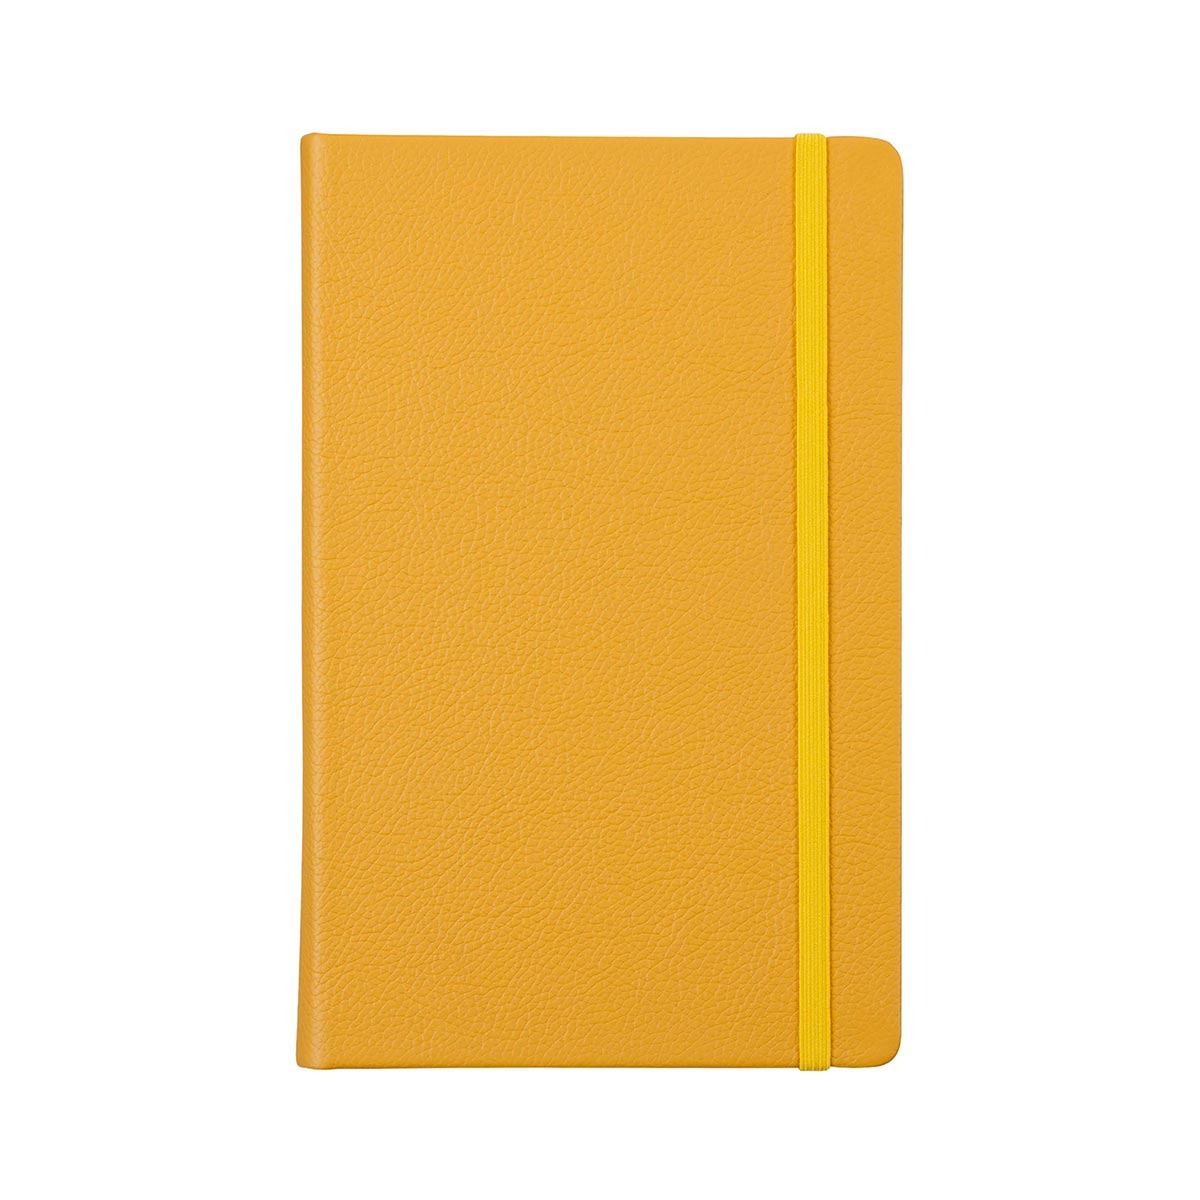 Front cover of the large Butter Yellow notebook with yellow elastic closure